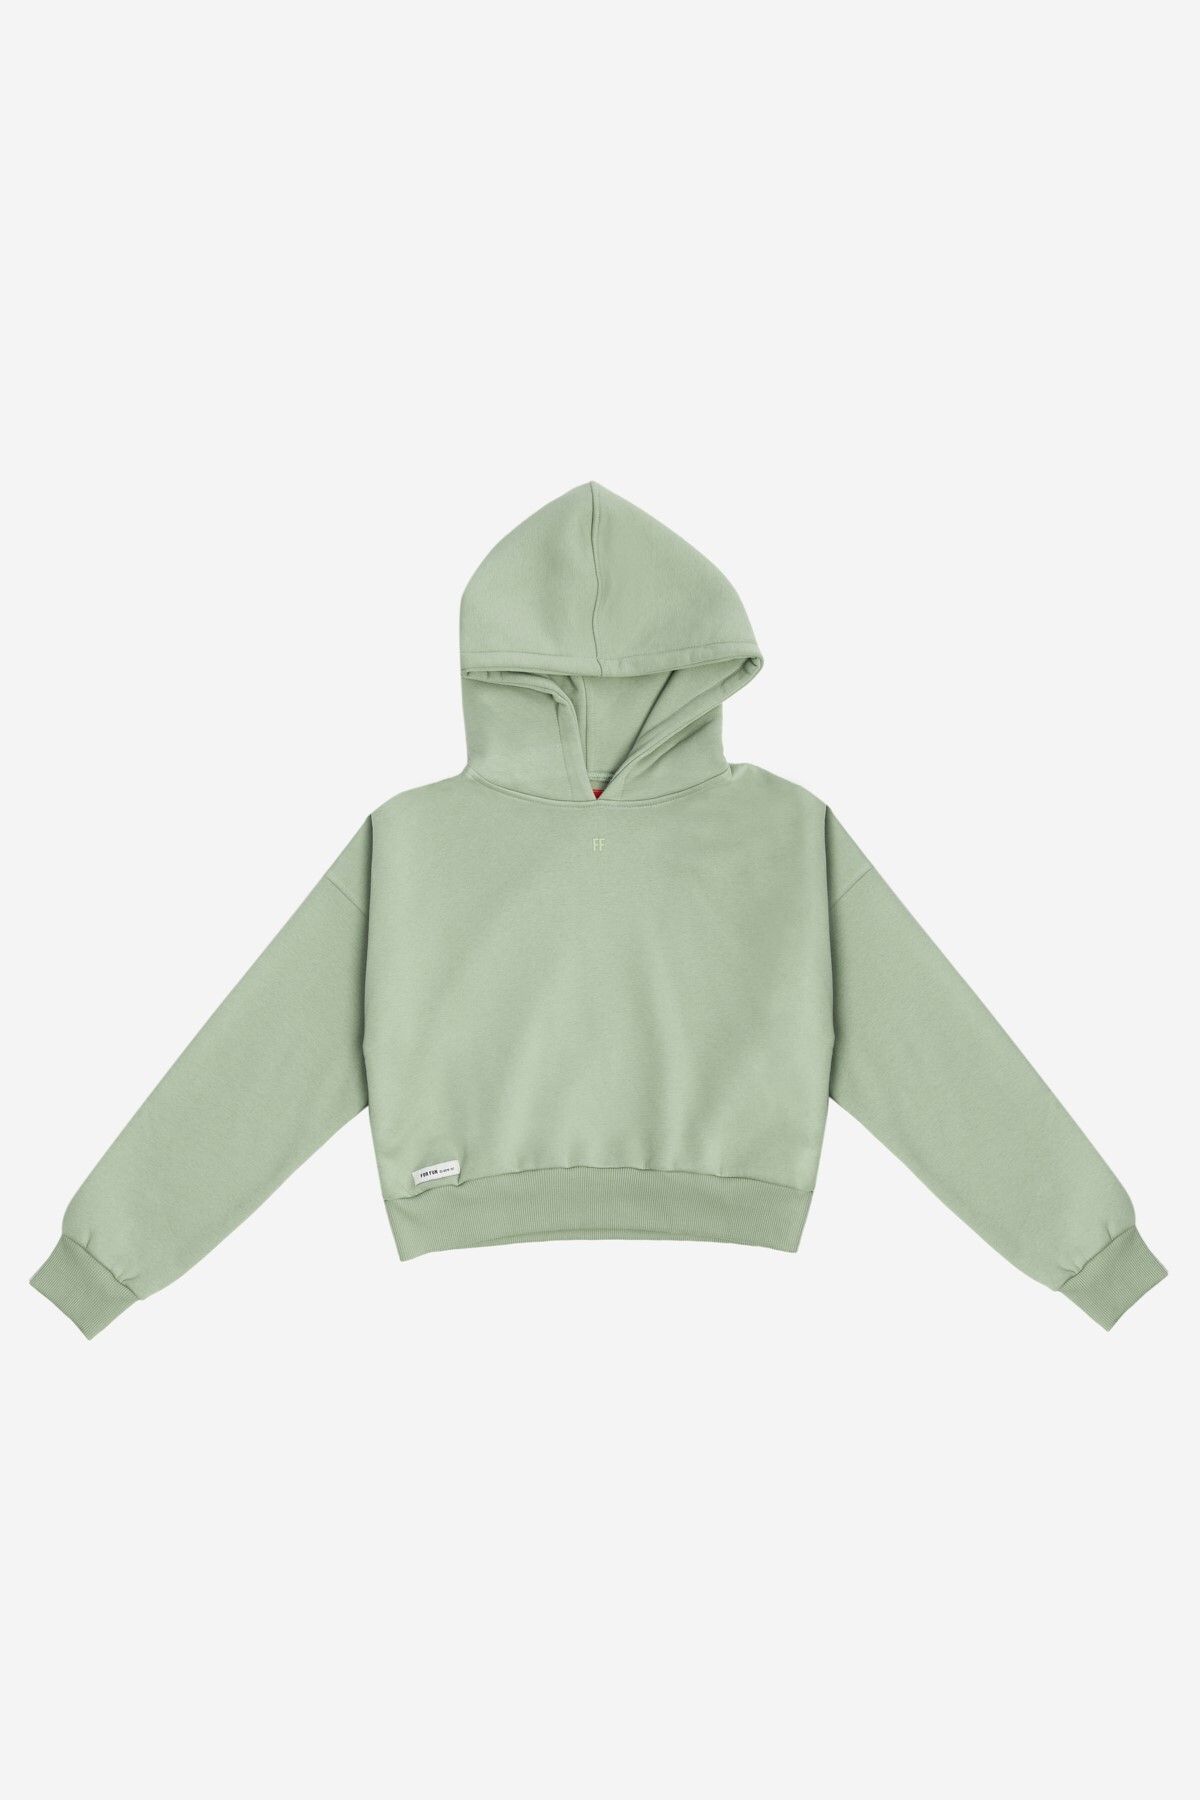 For Fun FF / Women Pullover Hoodie